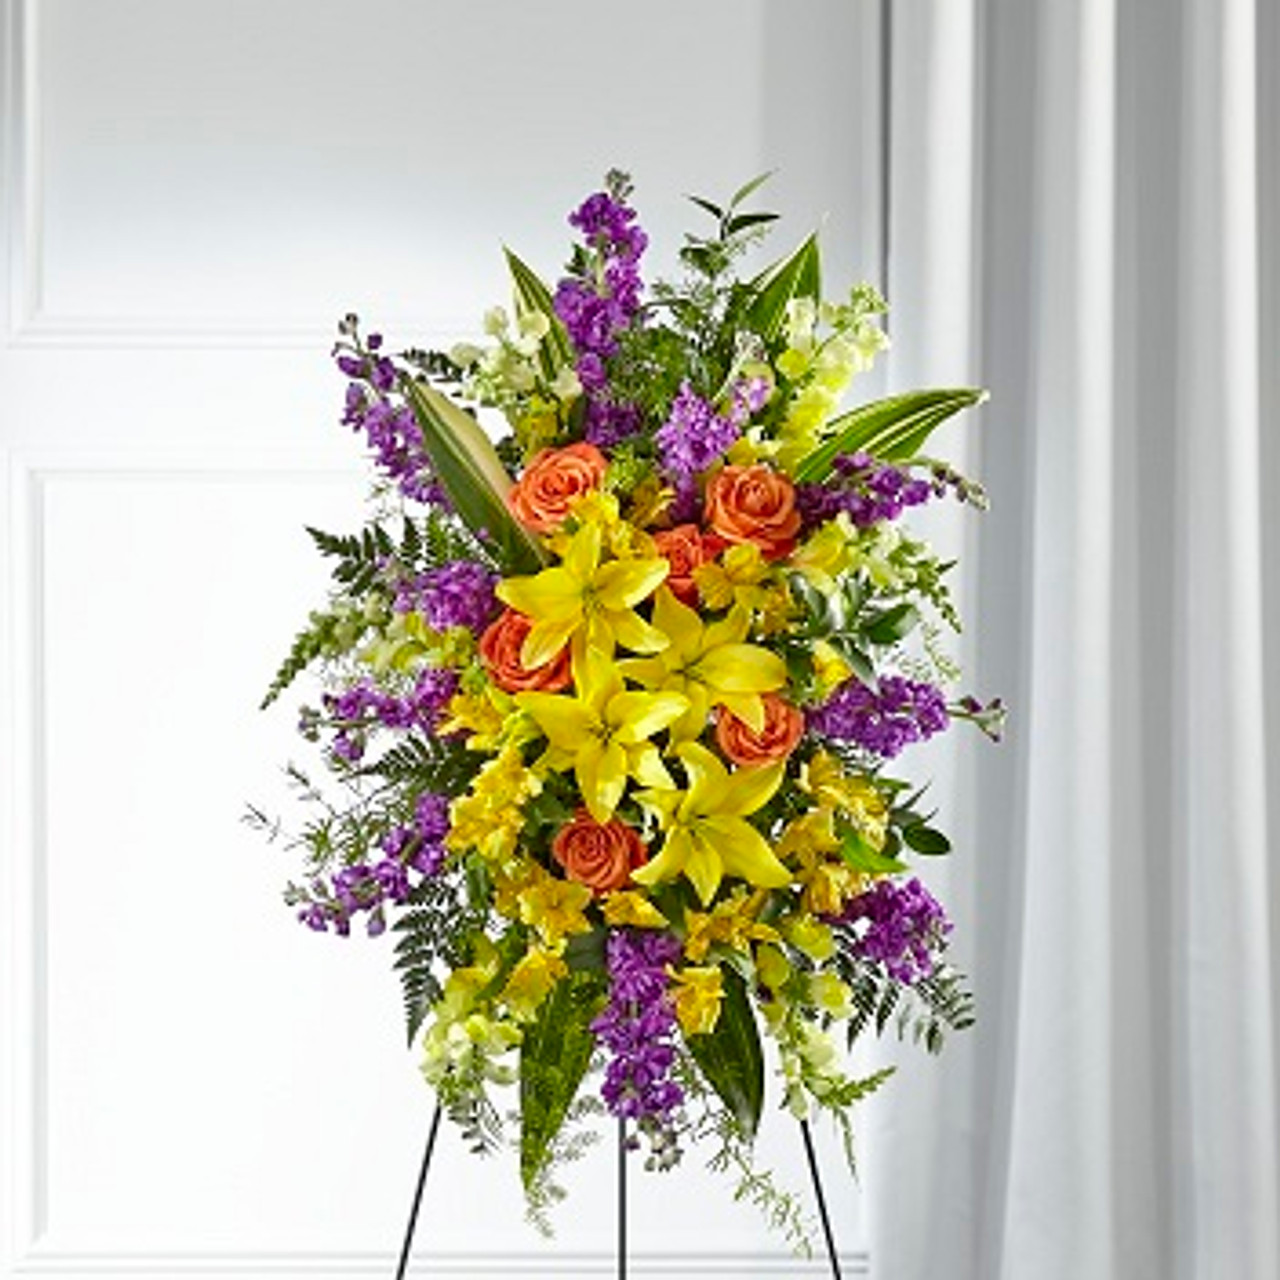 FUNERAL WREATH - For the Love of Sunflowers 115